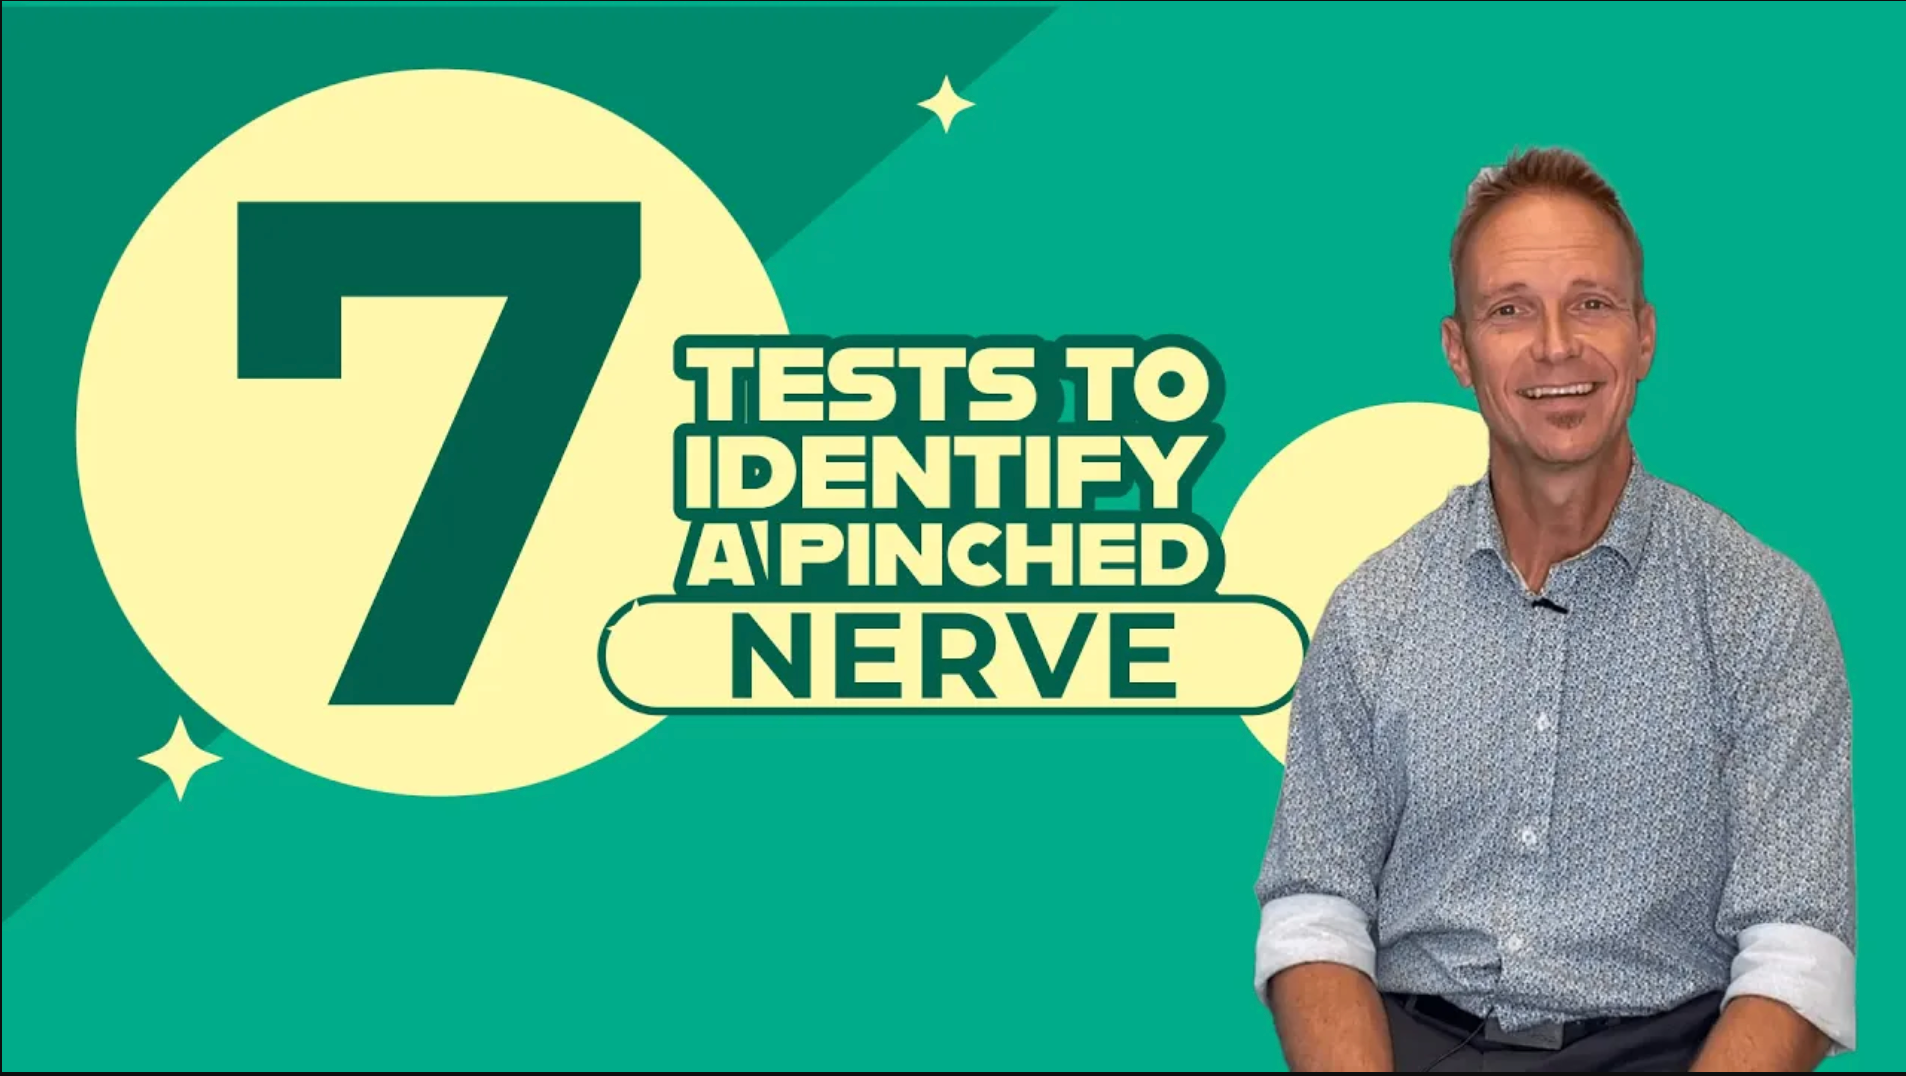 7 Tests to Identify a Pinched Nerve | Upper Cervical Chiropractor in Mount Dora, FL